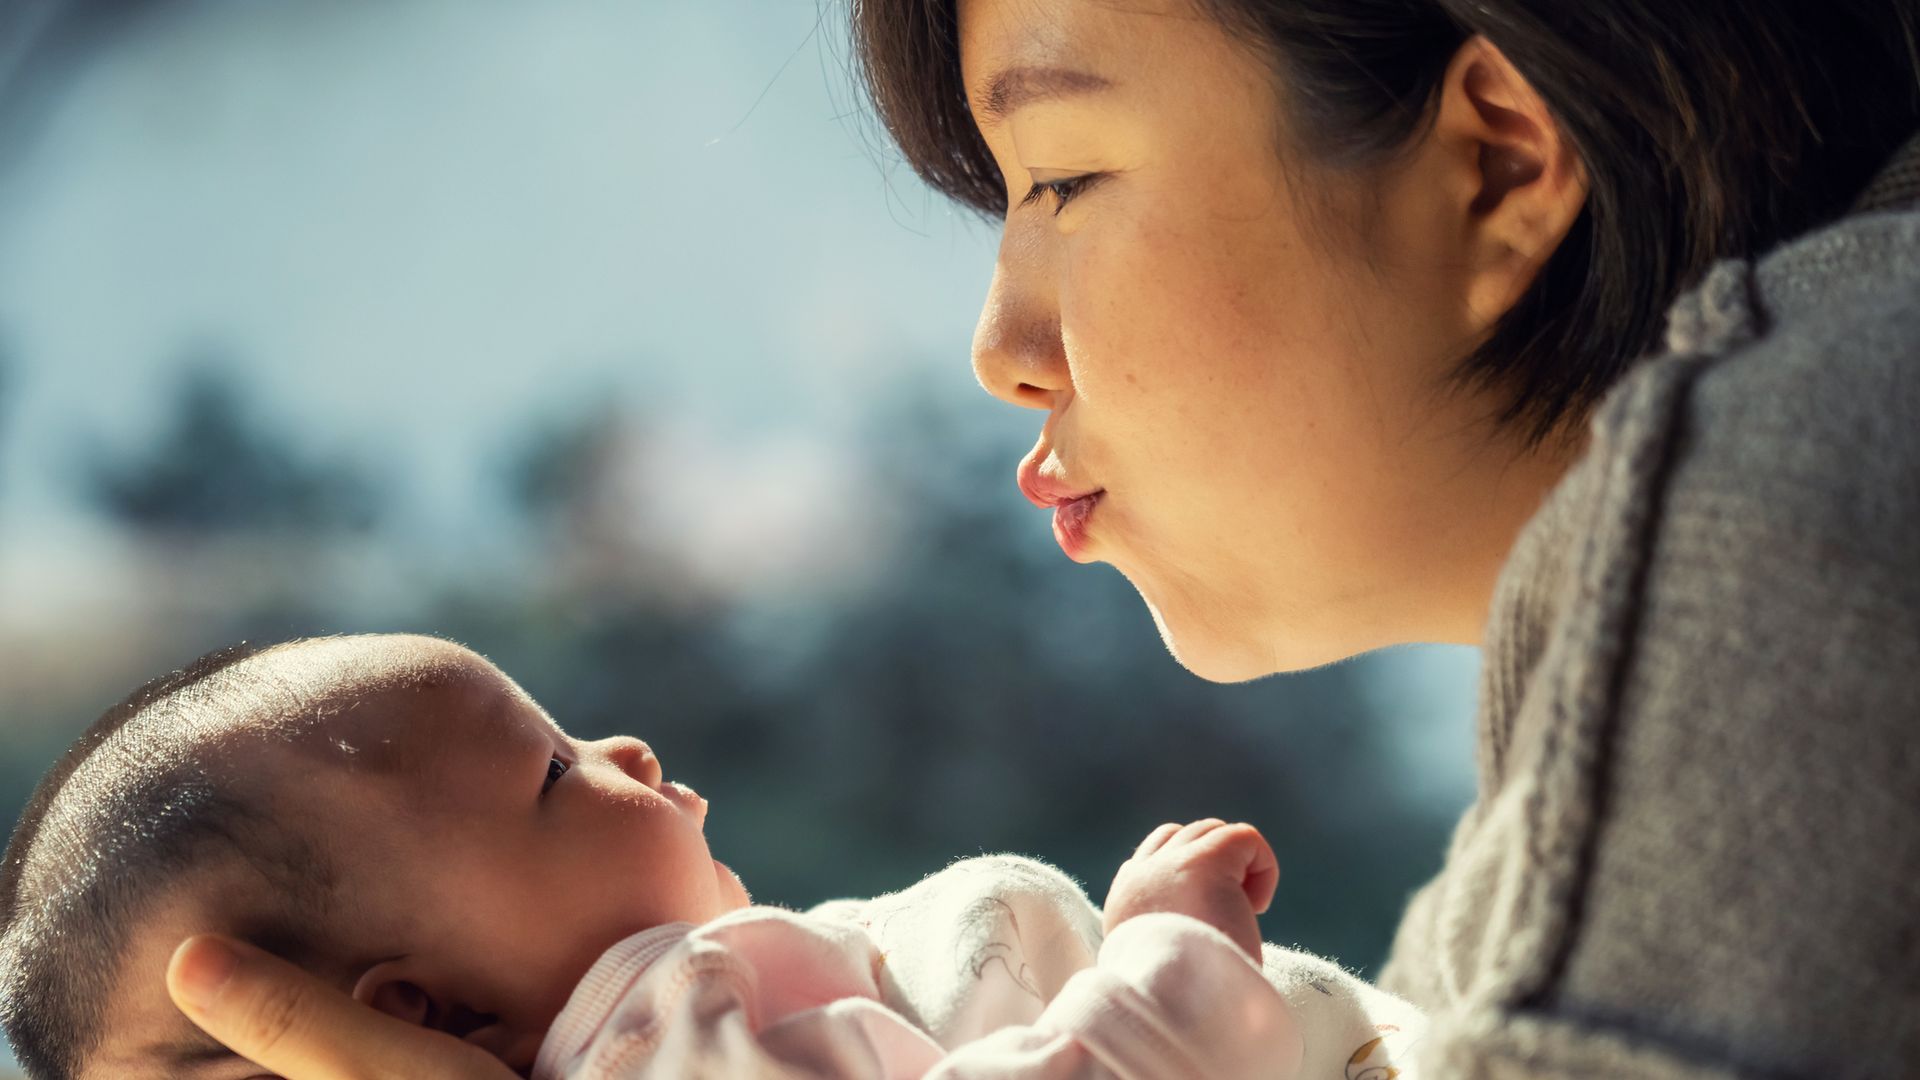 China is taking drastic steps to boost its falling birth rate